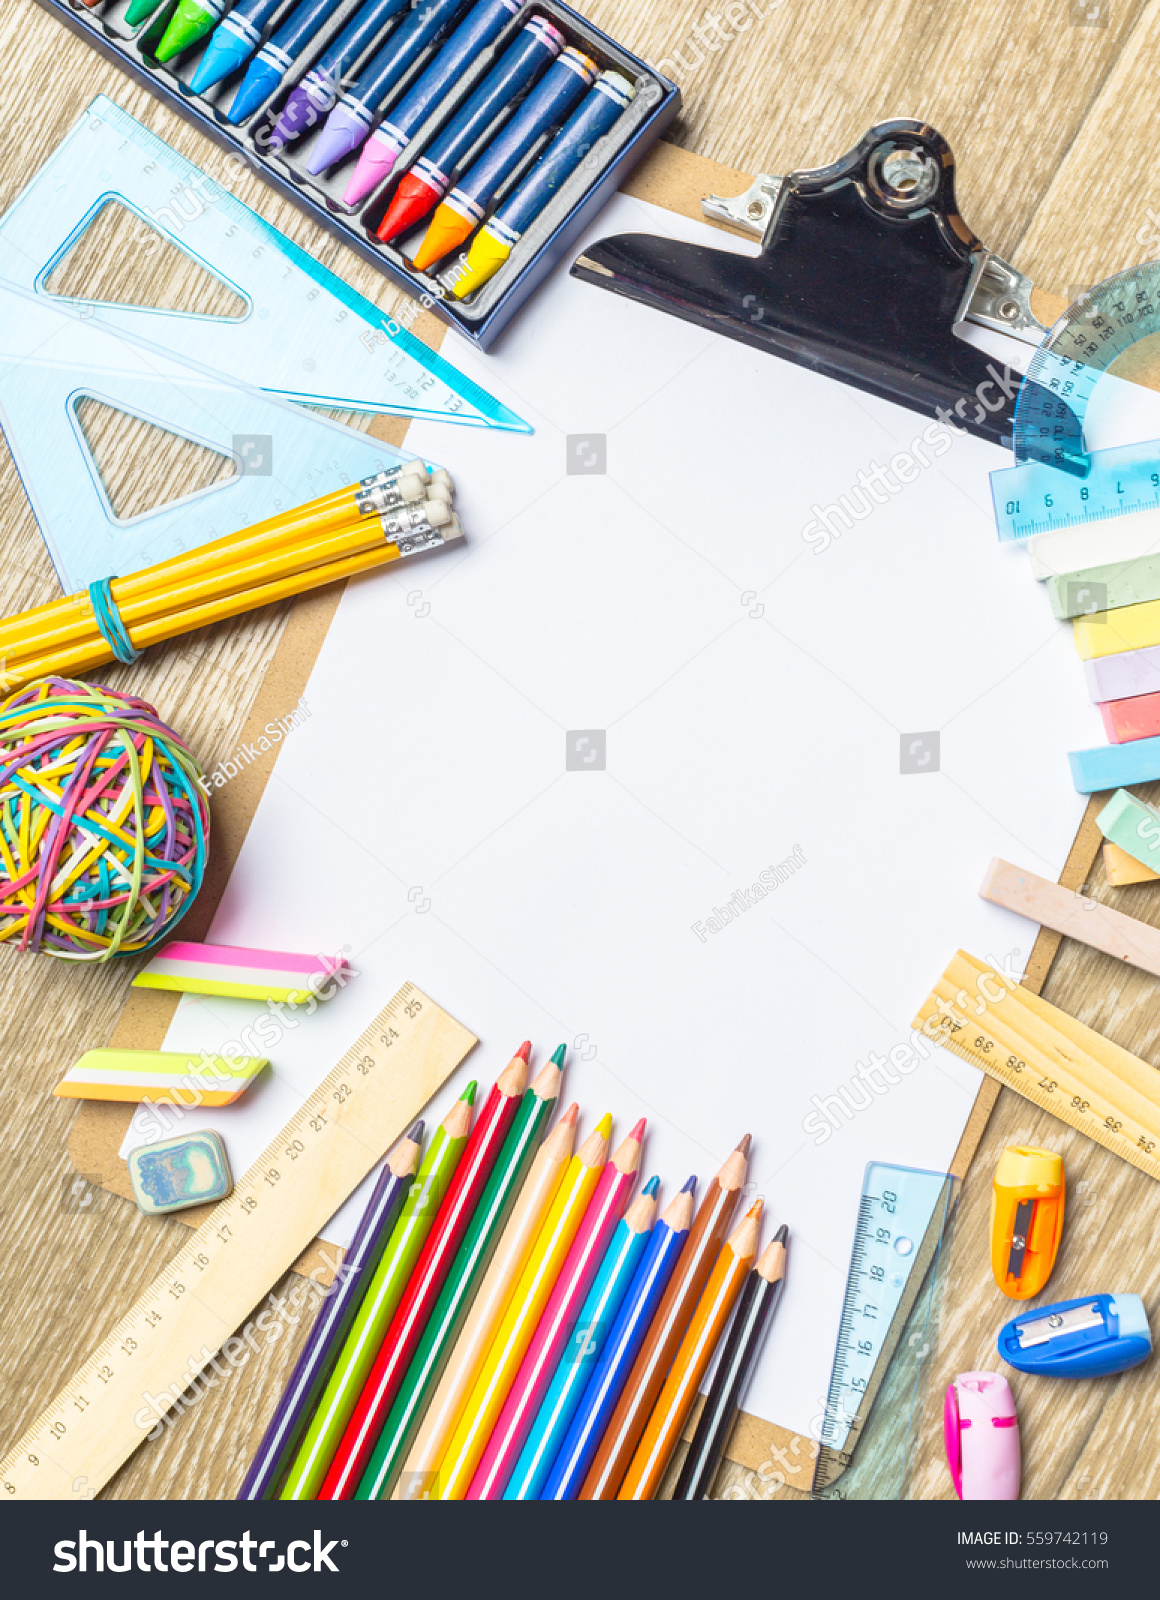 Download Various Colorful Drawing Tools Mock Stock Photo 559742119 - Shutterstock